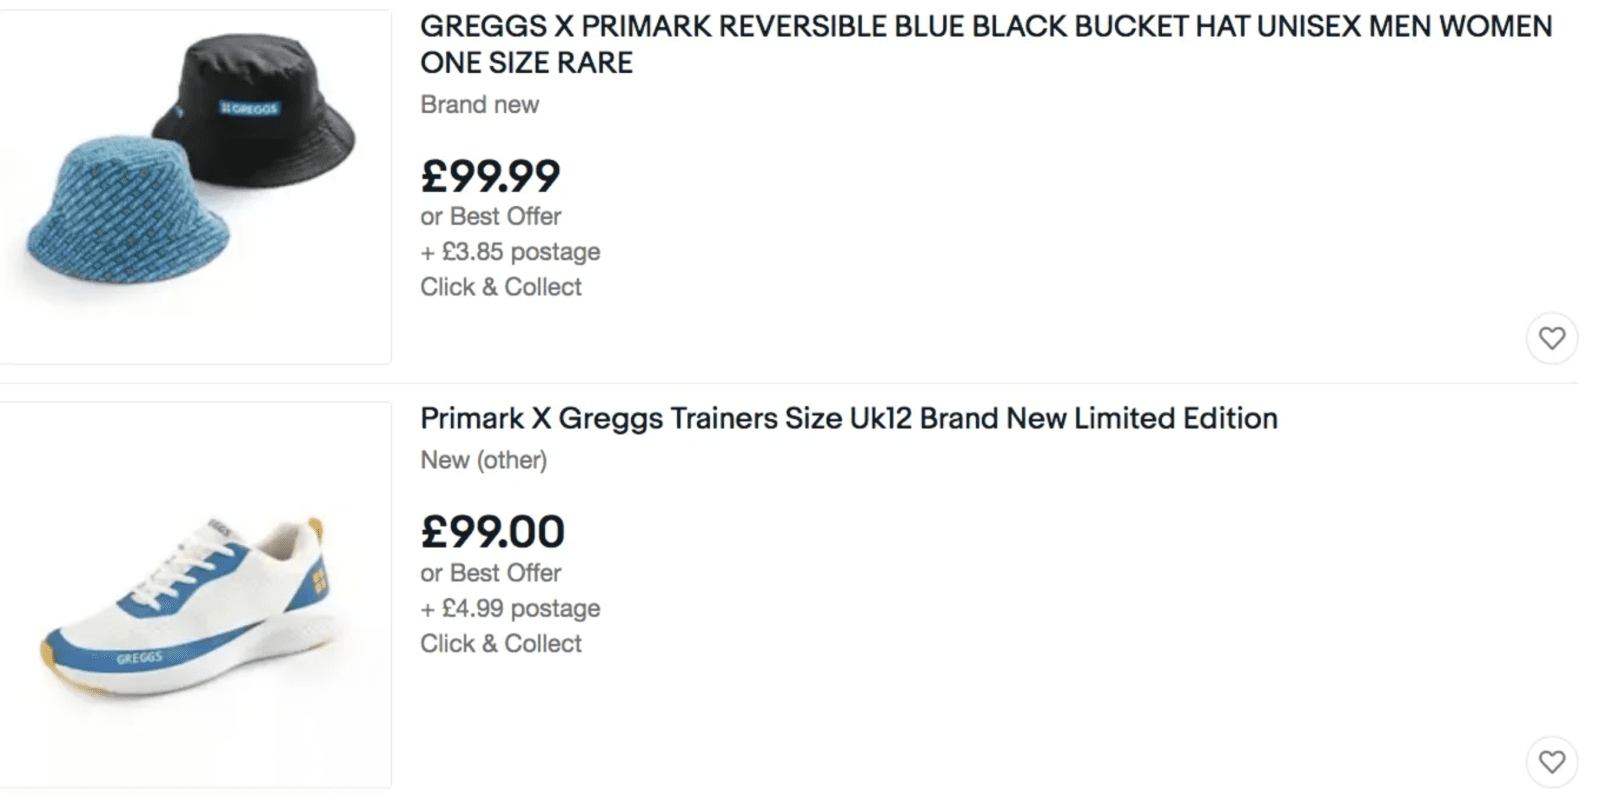 Products from the Greggs x Primark range found on eBay for three times the price, The Manc